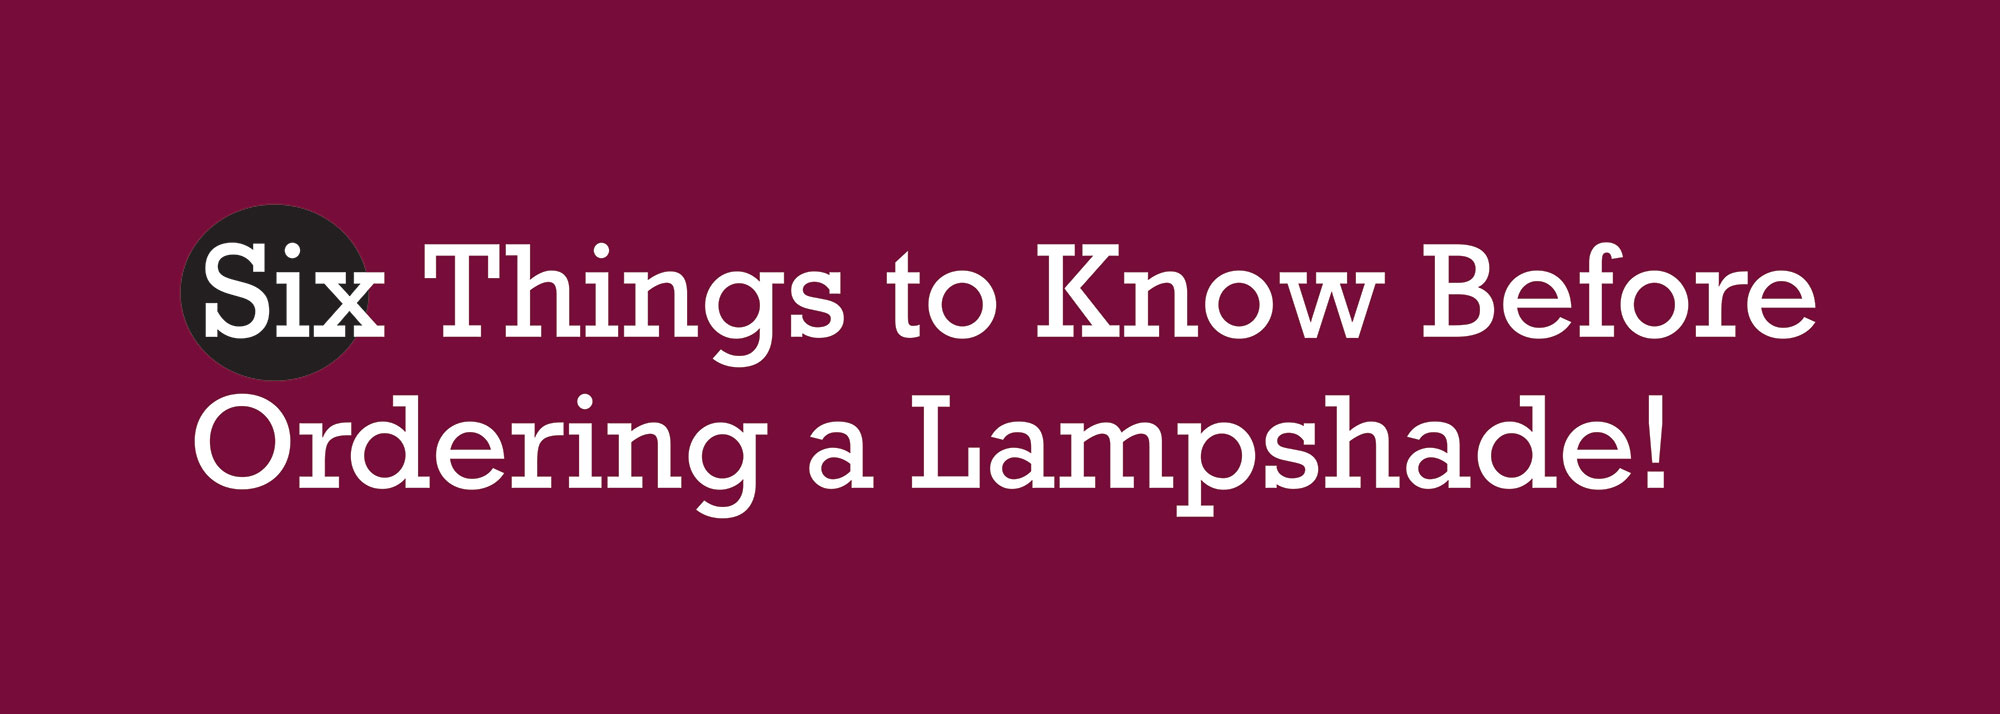 Six Things to Know Before Ordering a Lampshade!